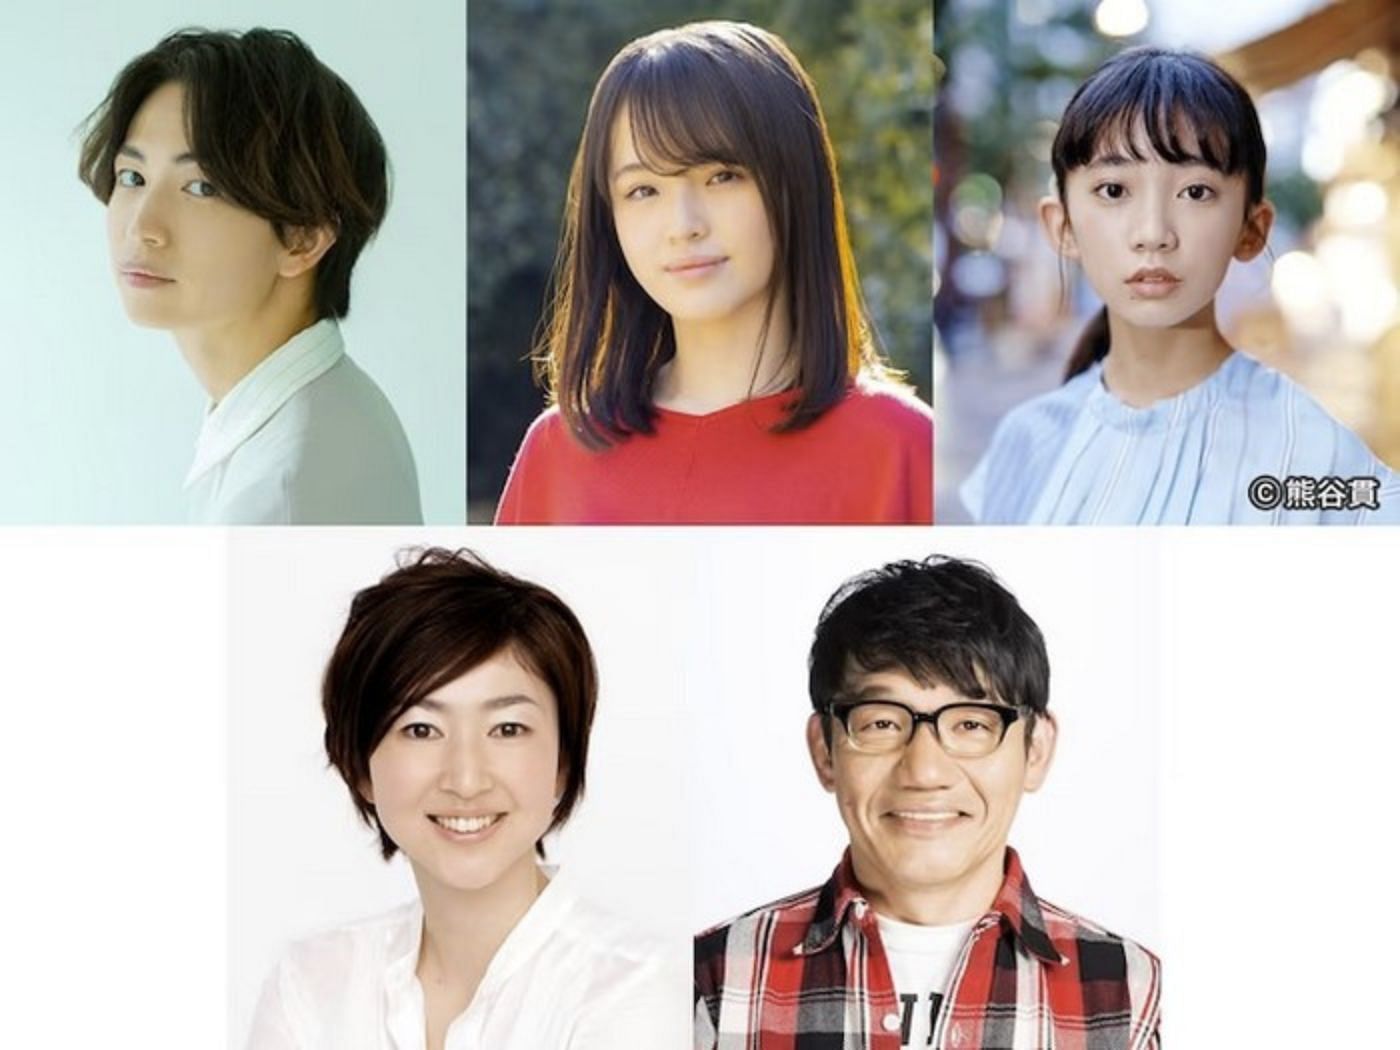 The newly announced cast members for the Live-Action Barakamon series (Image via Fuji TV)